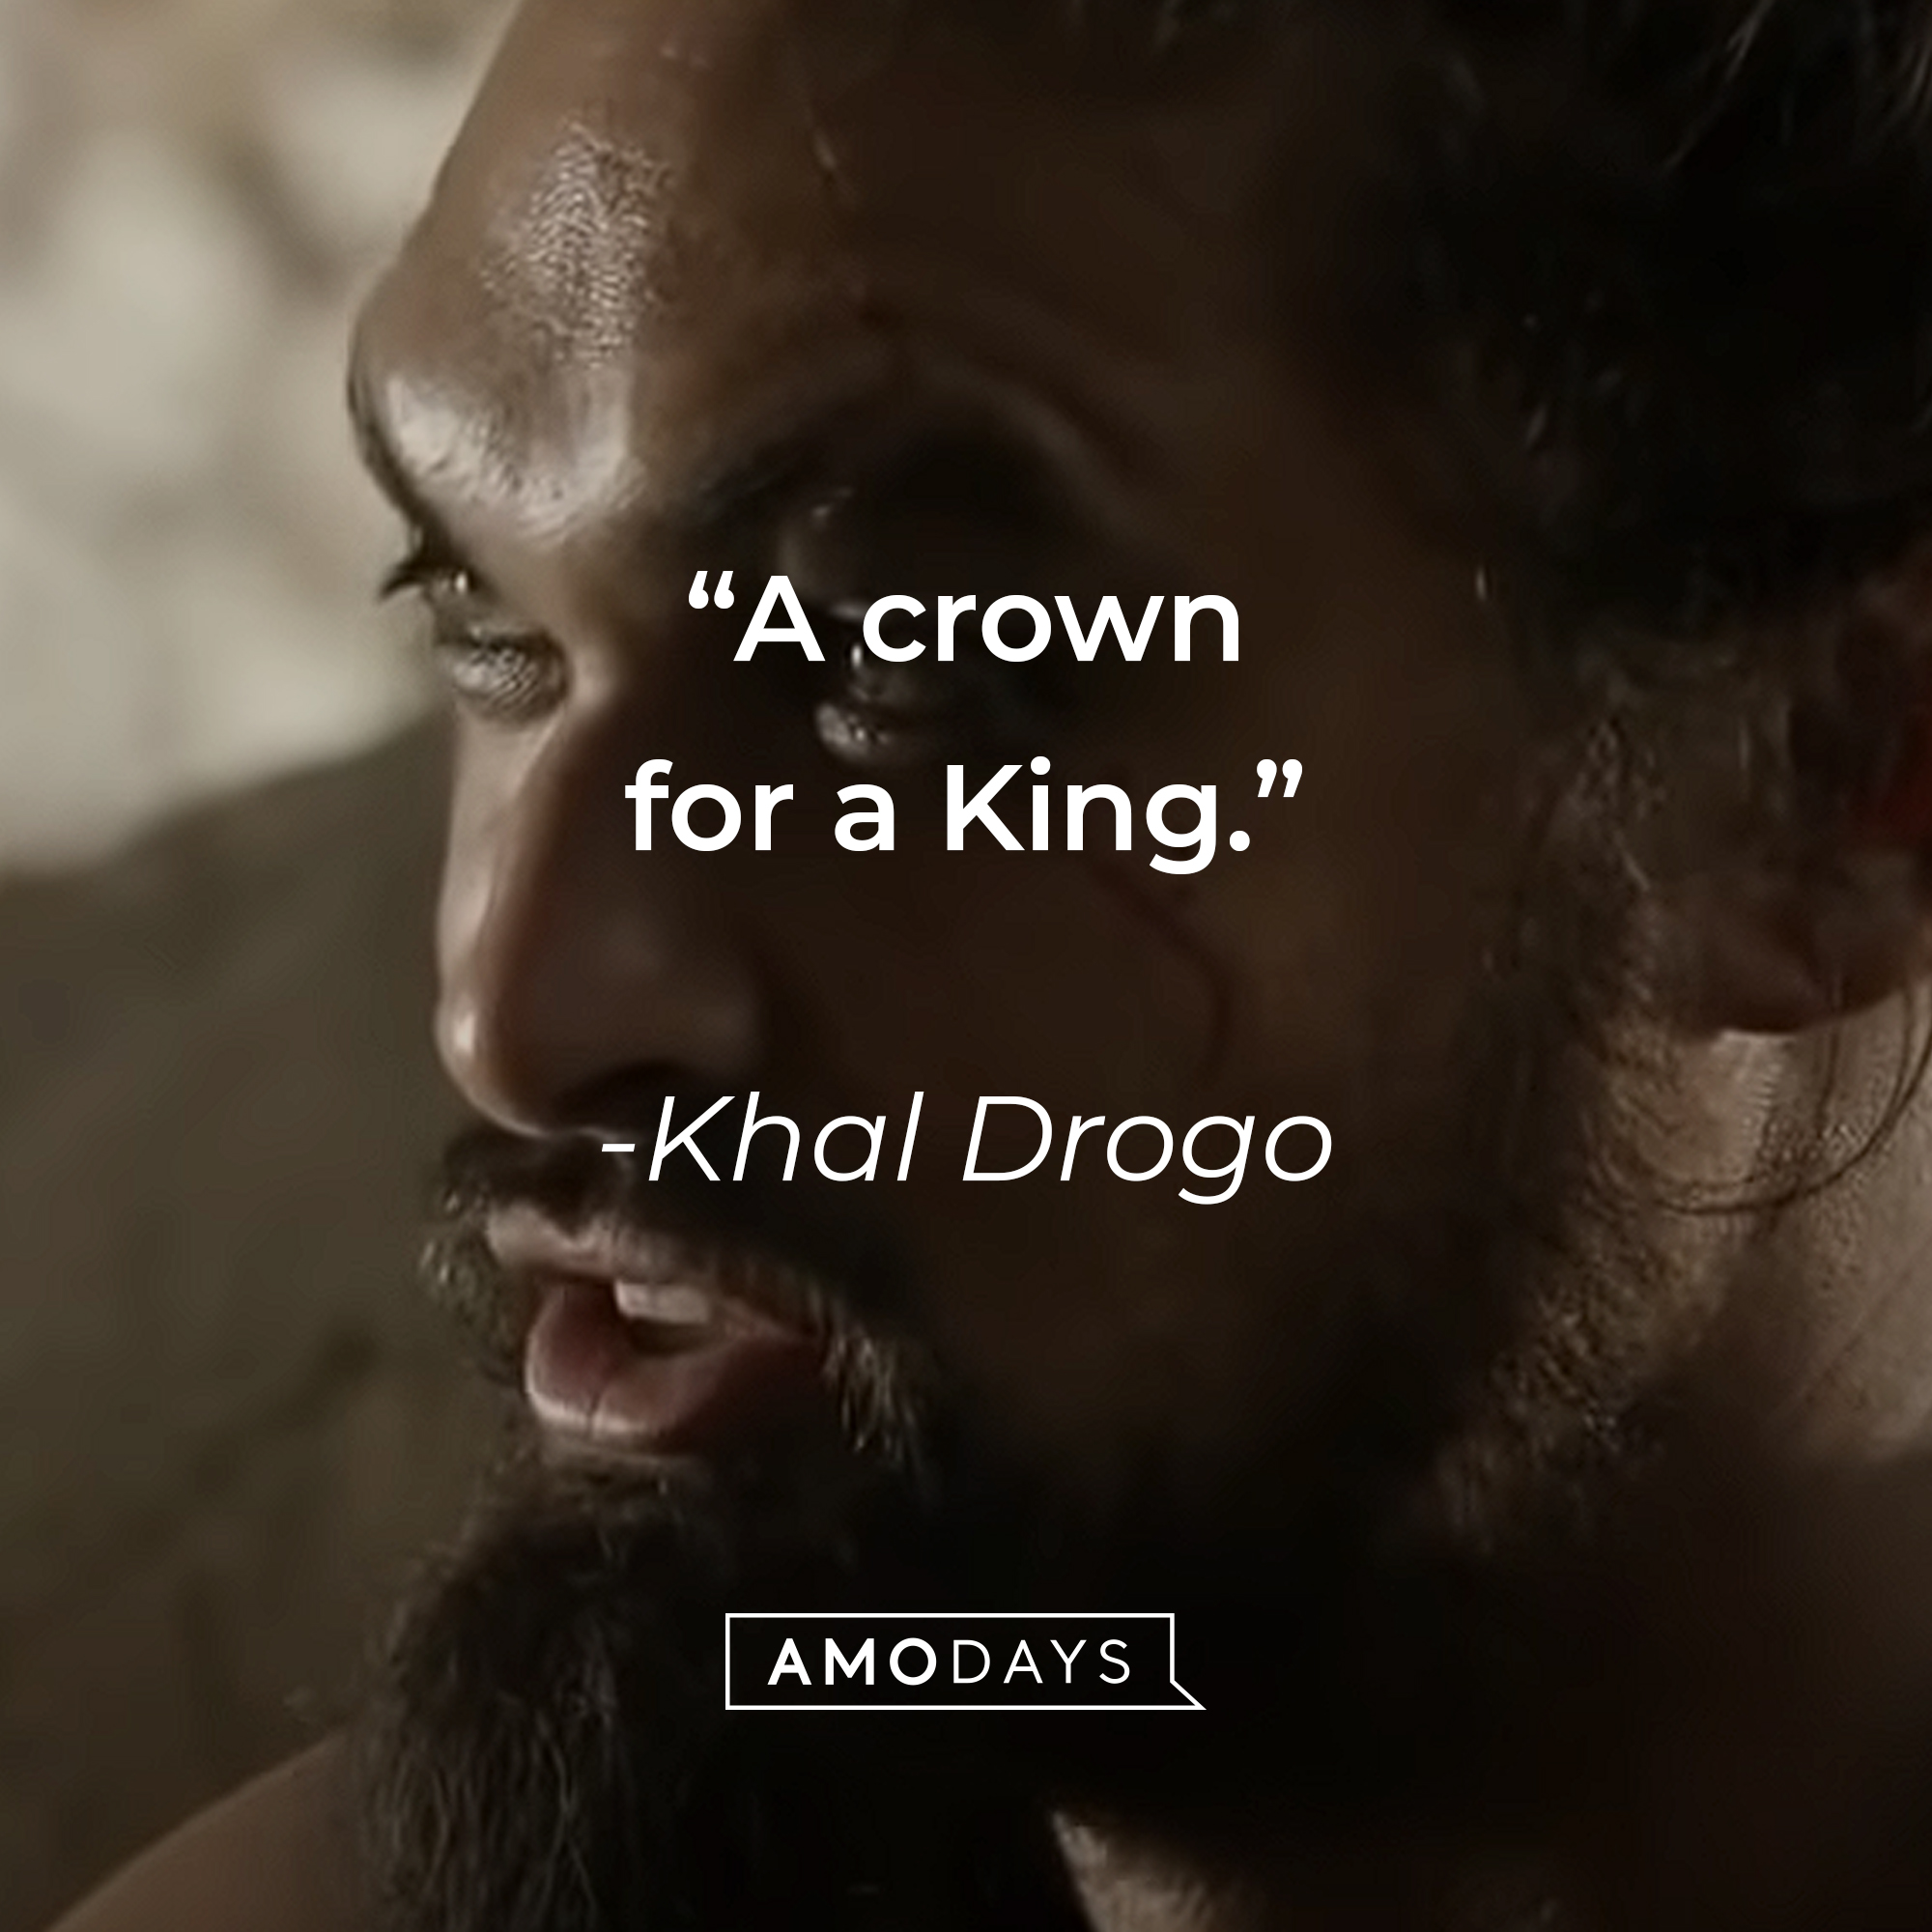 Khal Drogo's quote: "A crown for a King." | Source: youtube.com/gameofthrones